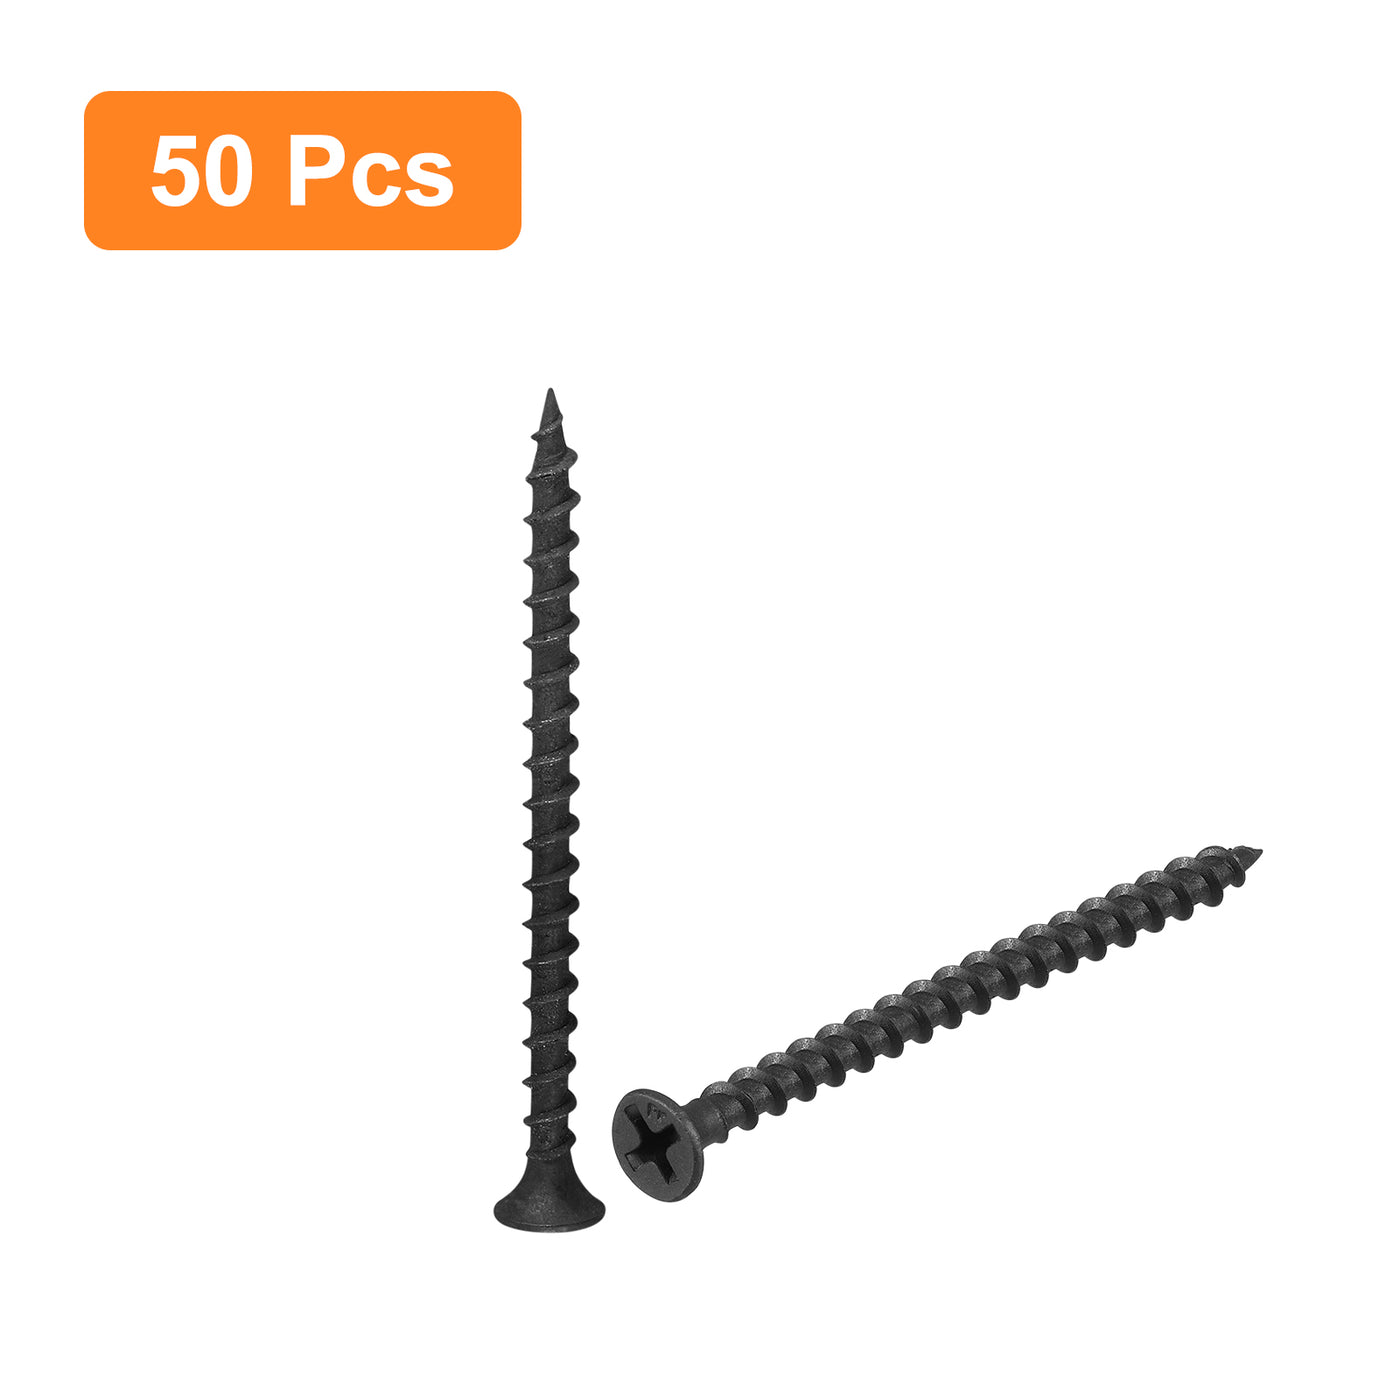 uxcell Uxcell M3.8x60mm 50pcs Phillips Drive Wood Screws, Carbon Steel Self Tapping Screws